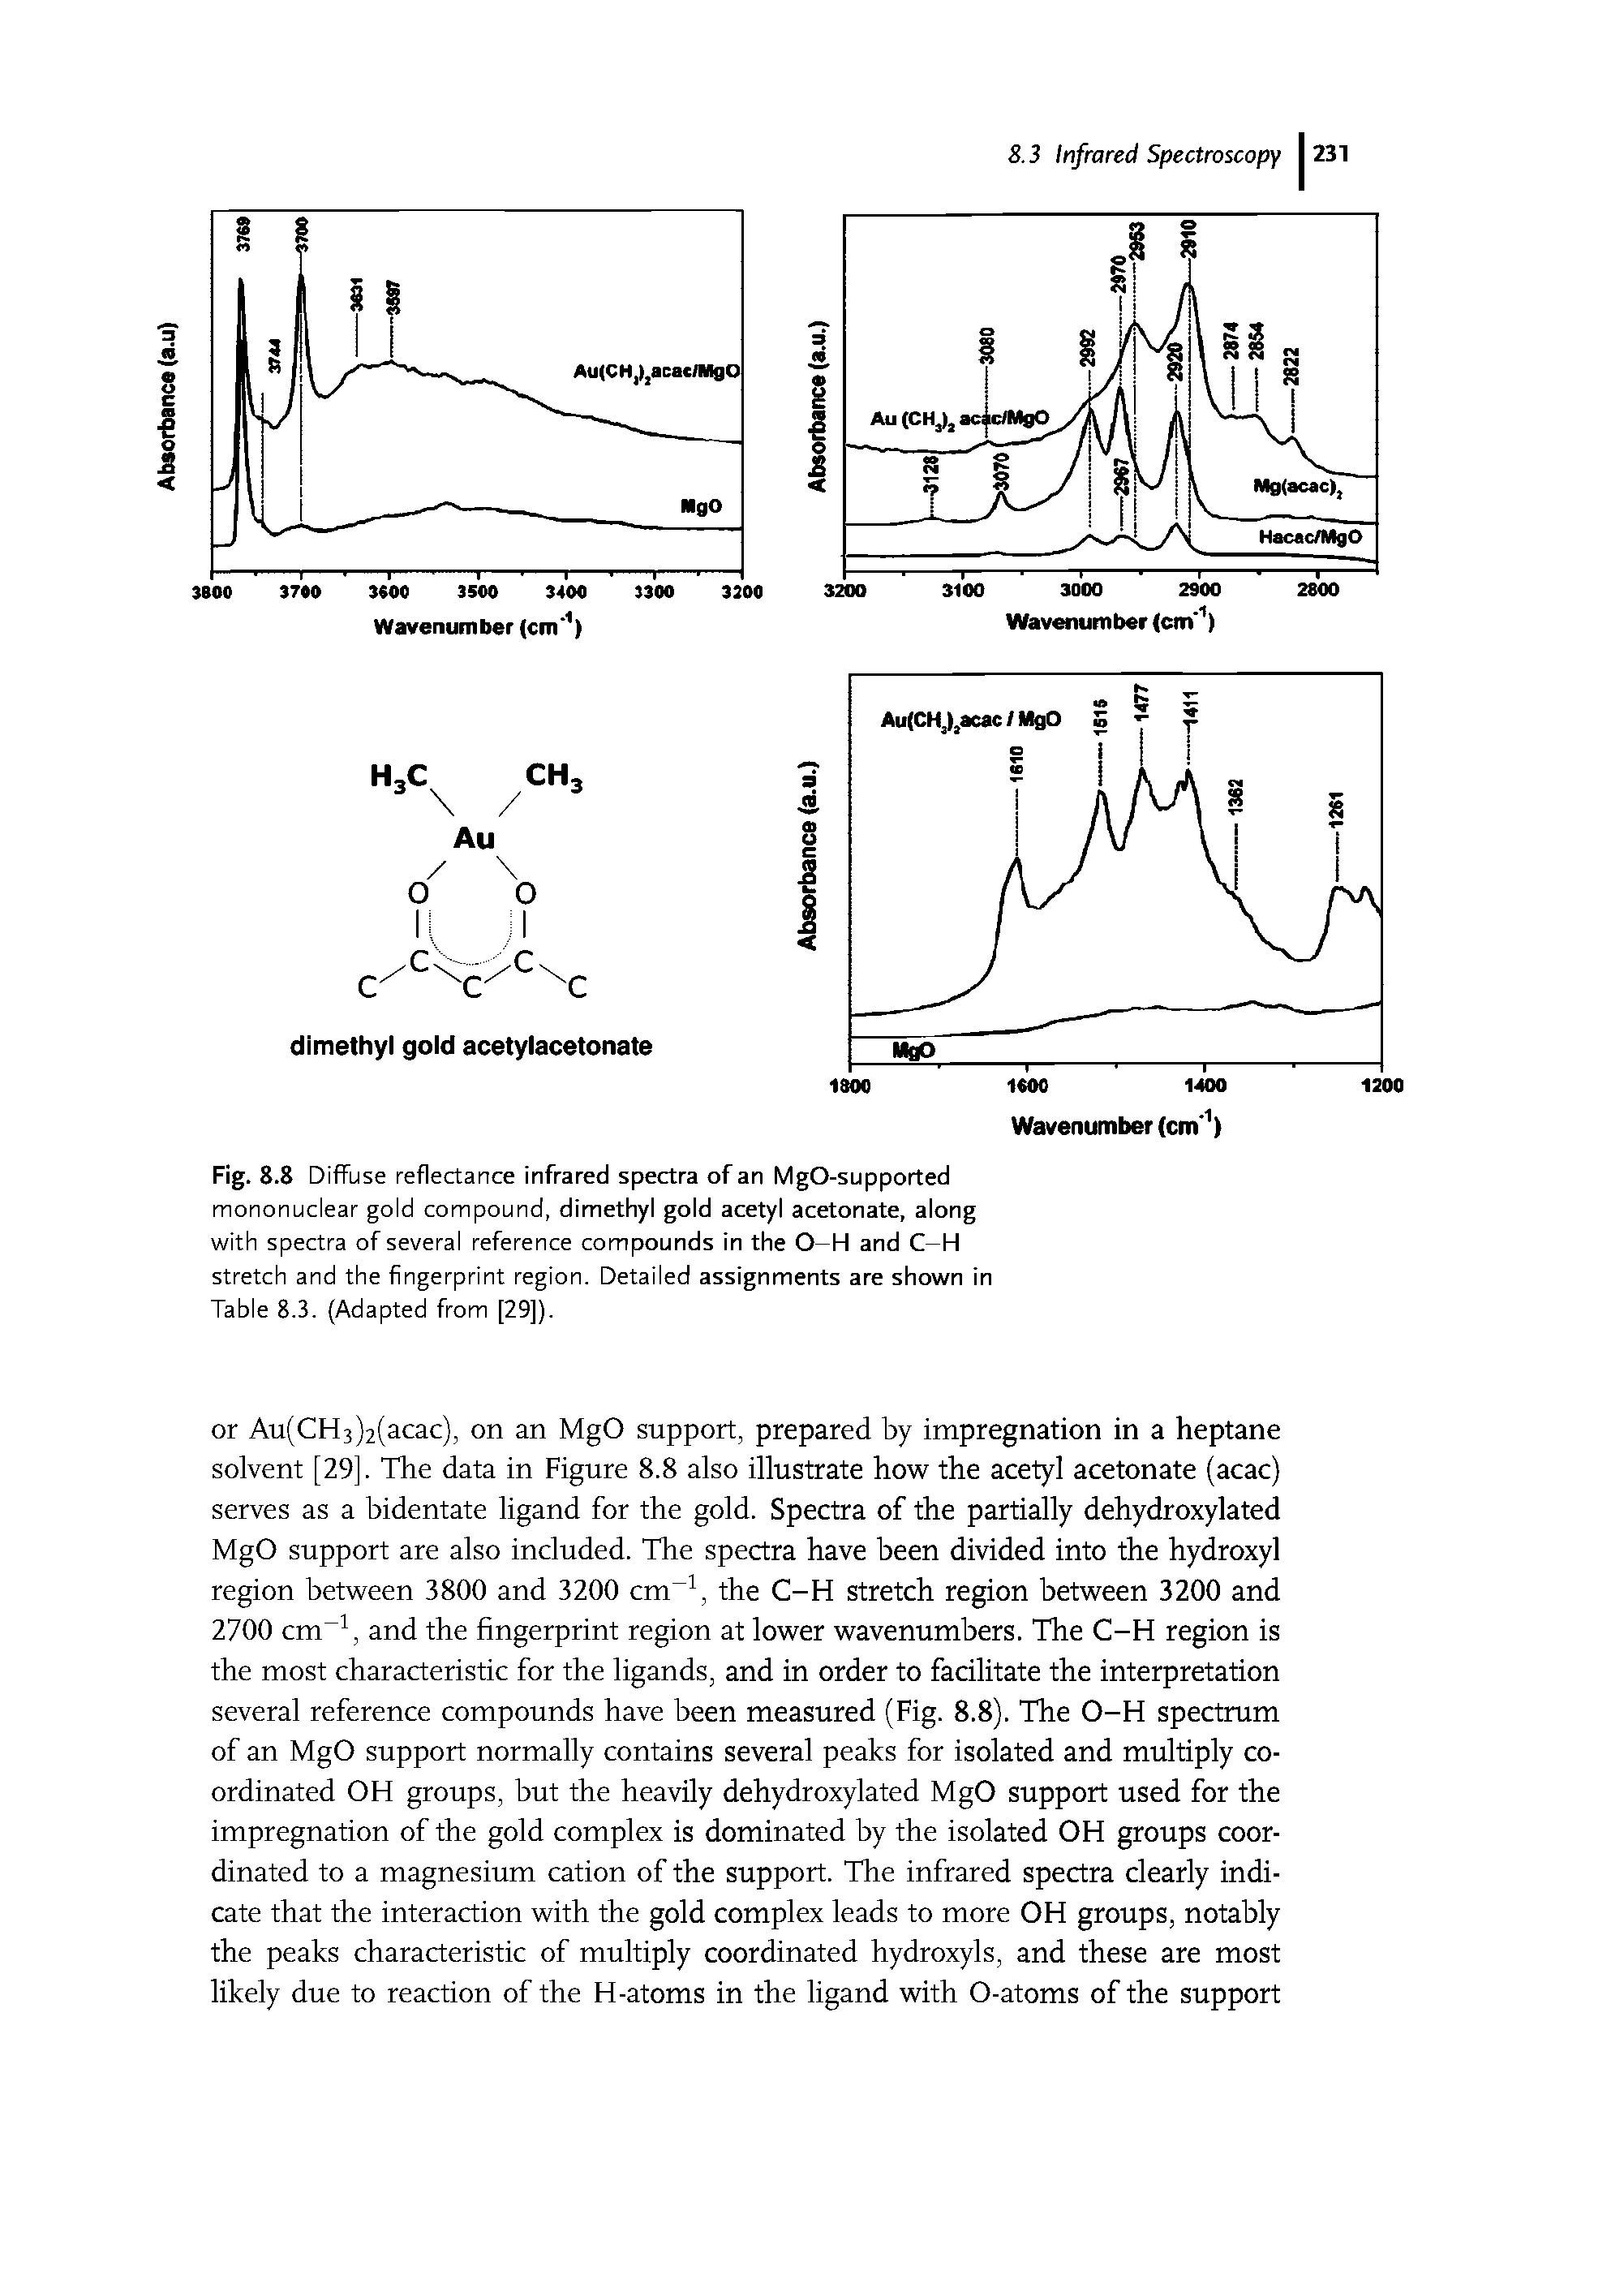 Fig. 8.8 Diffuse reflectance infrared spectra of an MgO-supported mononuclear gold compound, dimethyl gold acetyl acetonate, along with spectra of several reference compounds in the O—H and C—H stretch and the fingerprint region. Detailed assignments are shown in Table 8.3. (Adapted from [29]).